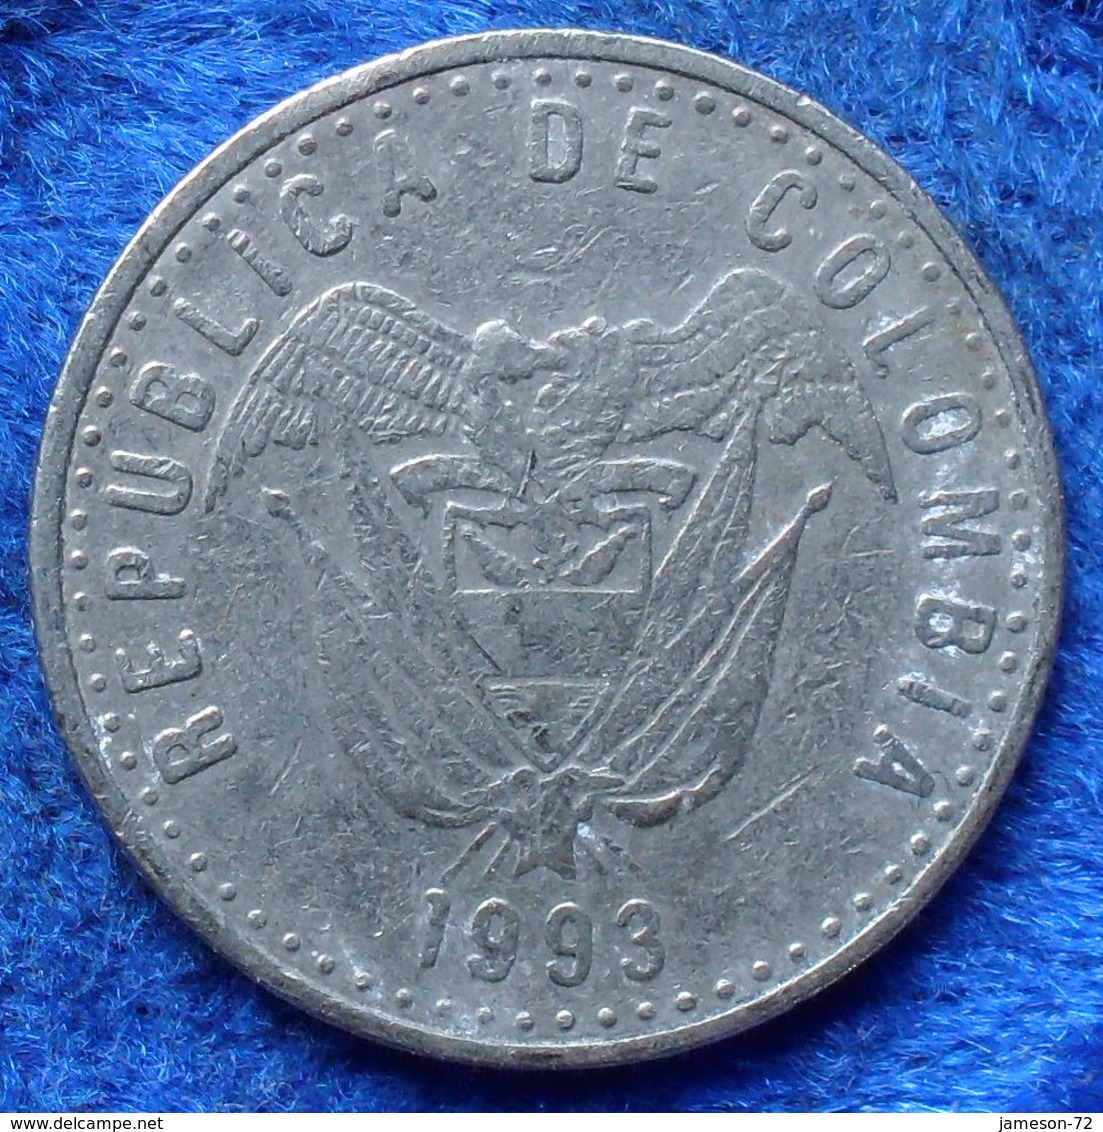 COLOMBIA - 50 Pesos 1993 KM# 283.1 Republic America - Edelweiss Coins - Colombie